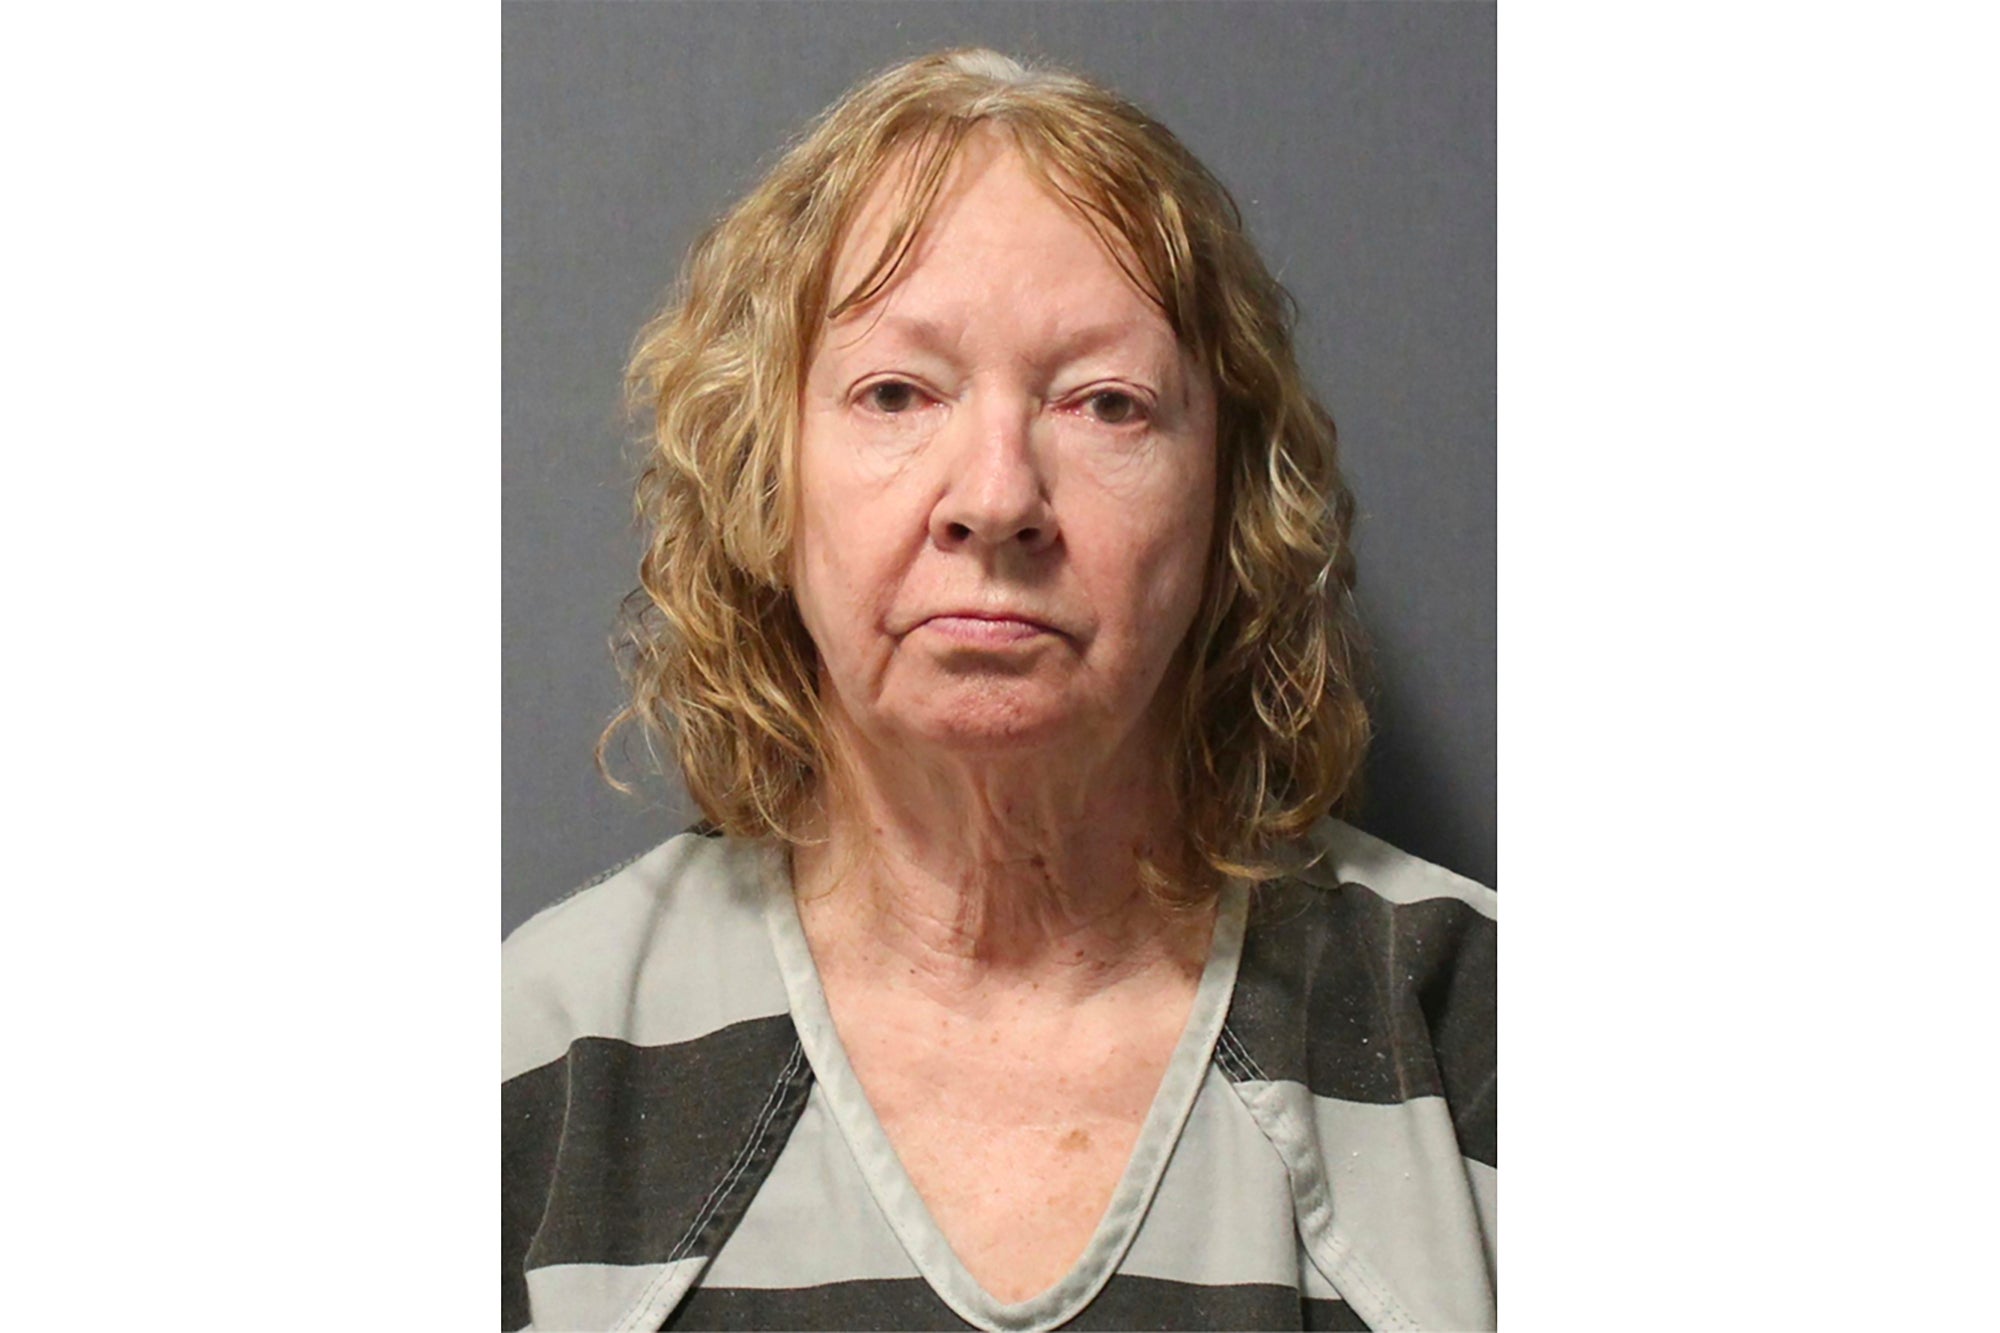 Chidester, 66, in a booking photo provided by the Monroe County Sheriff's Office